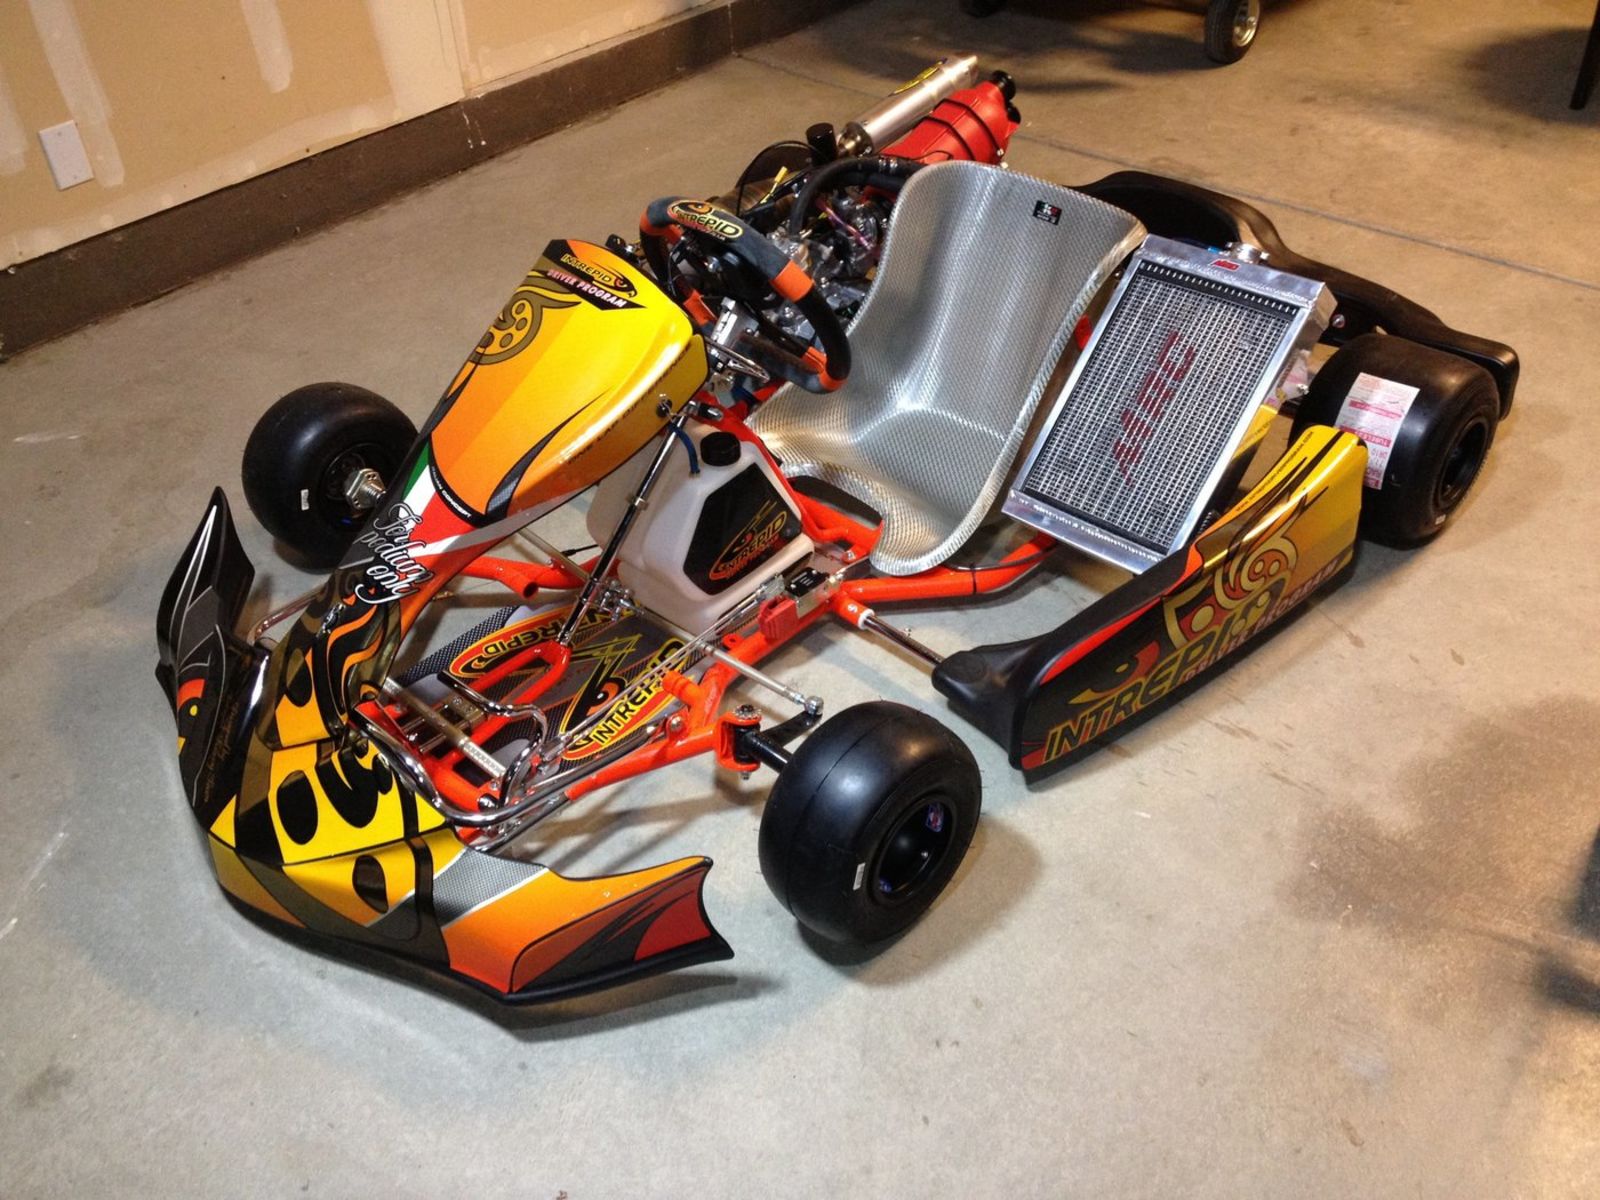 This is a fast go kart